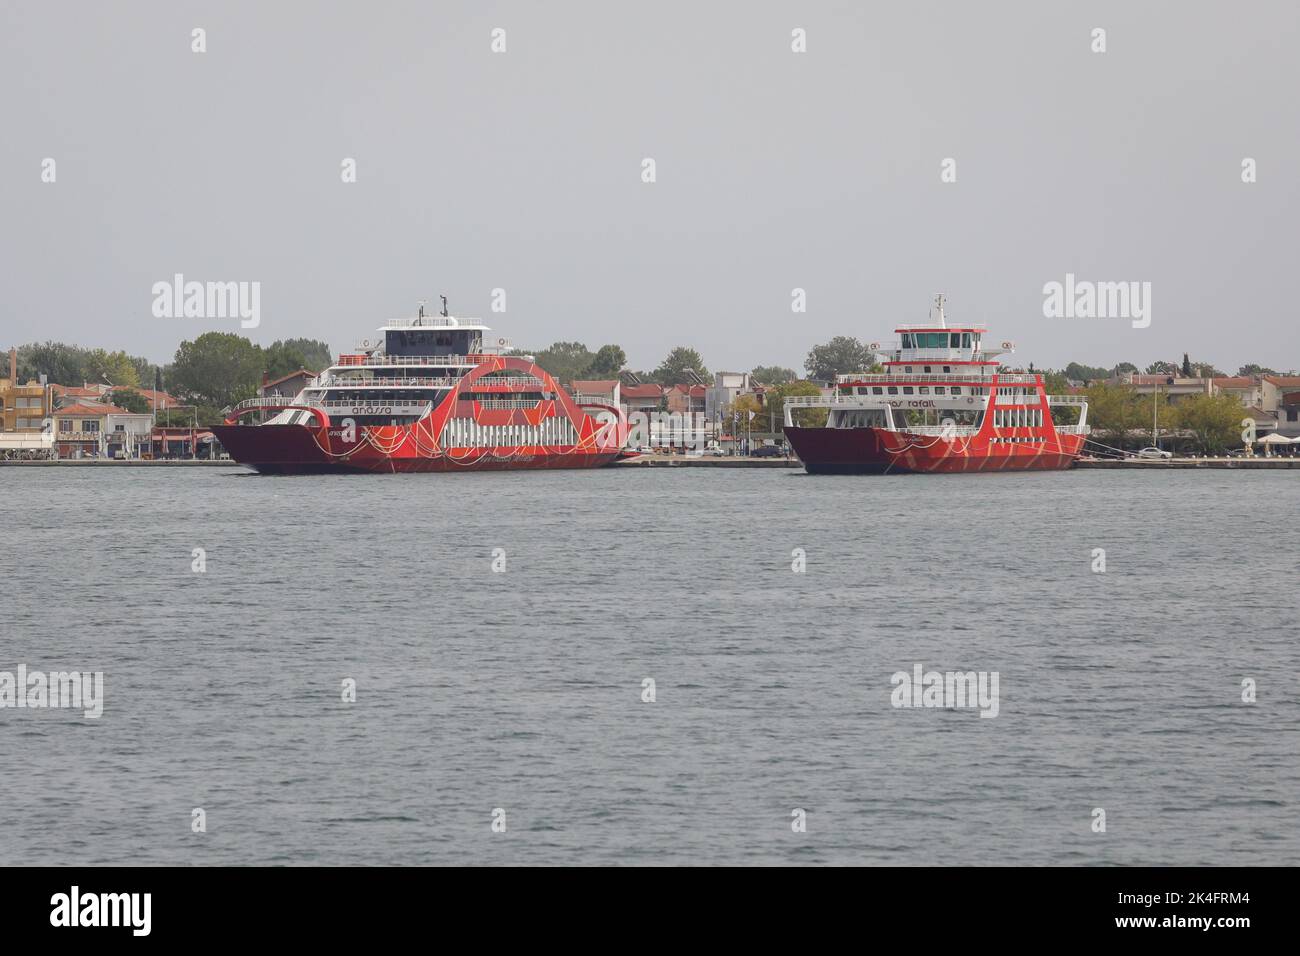 Thassos, Greece - August 25, 2022: Ferryboat taking people and their cars from continental Greece to the island of Thassos in the Thracian Sea. Stock Photo